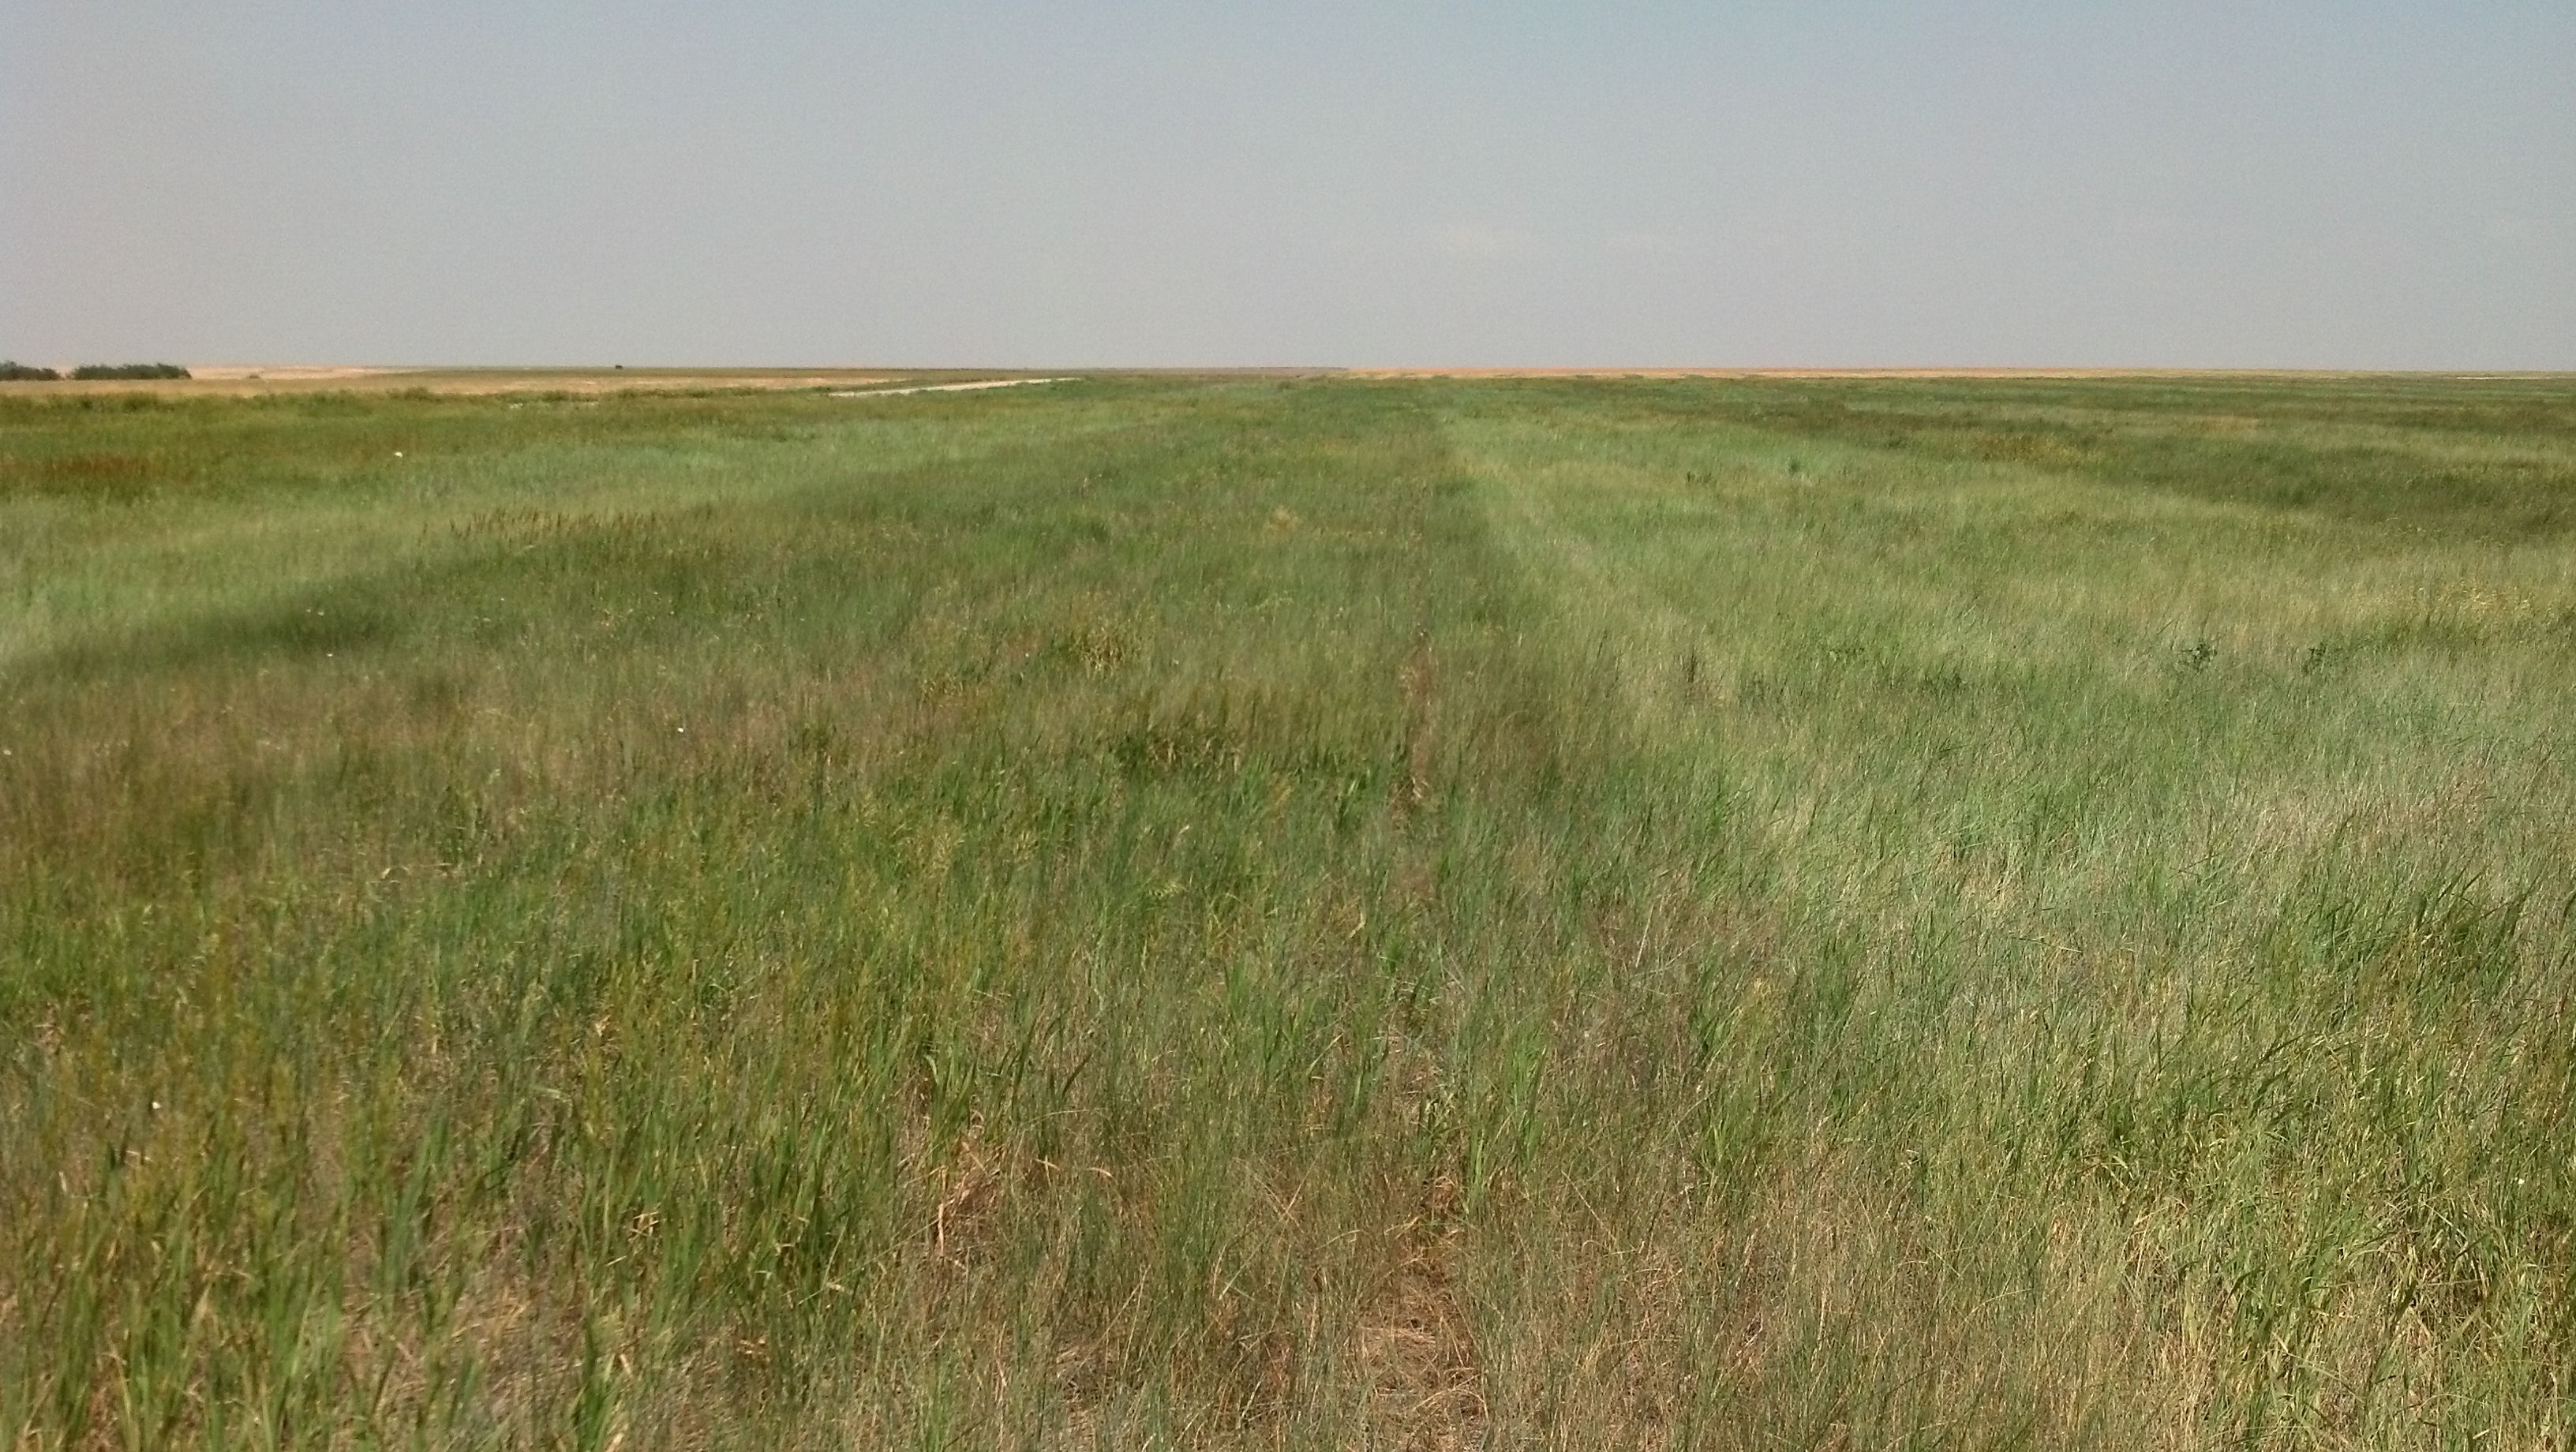 Item 16 in SOLD!! 160+/- Acres Ness Co. KS gallery